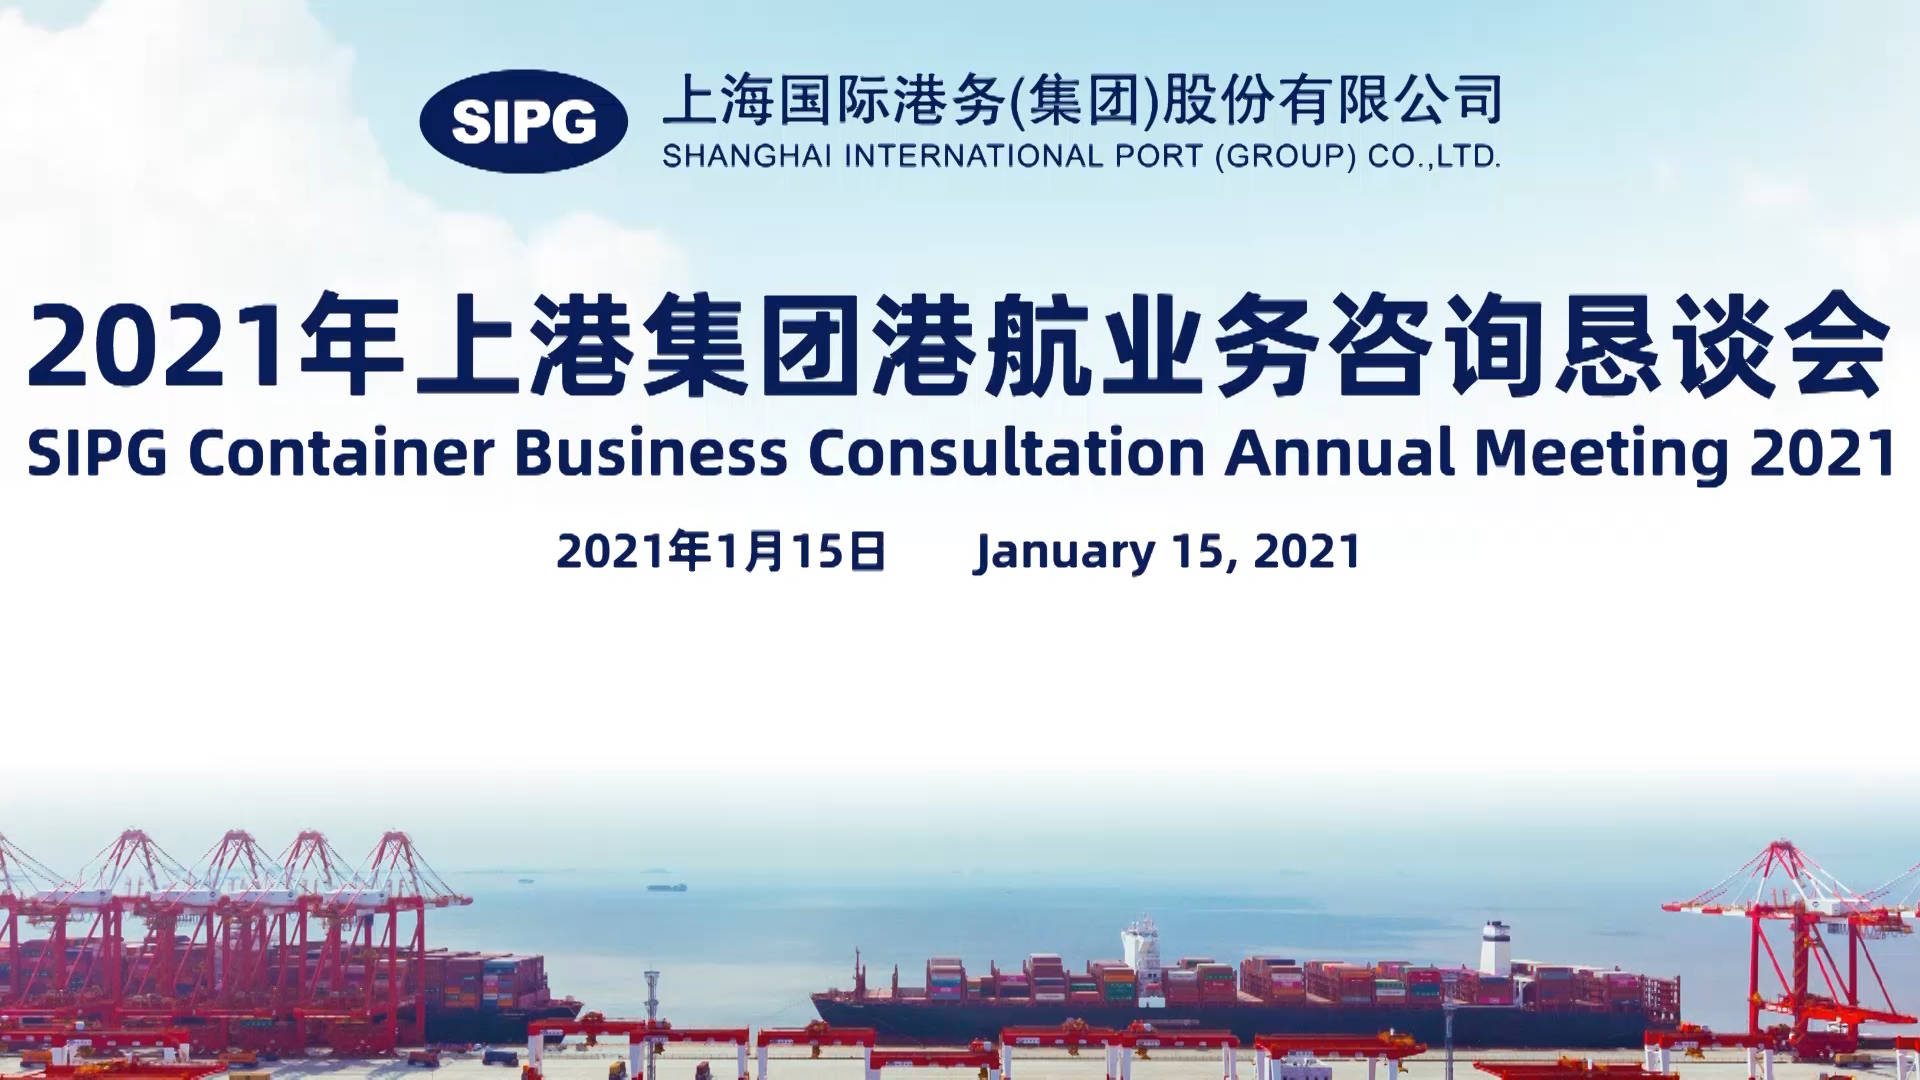 SIPG Discusses Future Development with Ship Owners and Cargo Owners with a Focus on Yangtze River Delta Integration